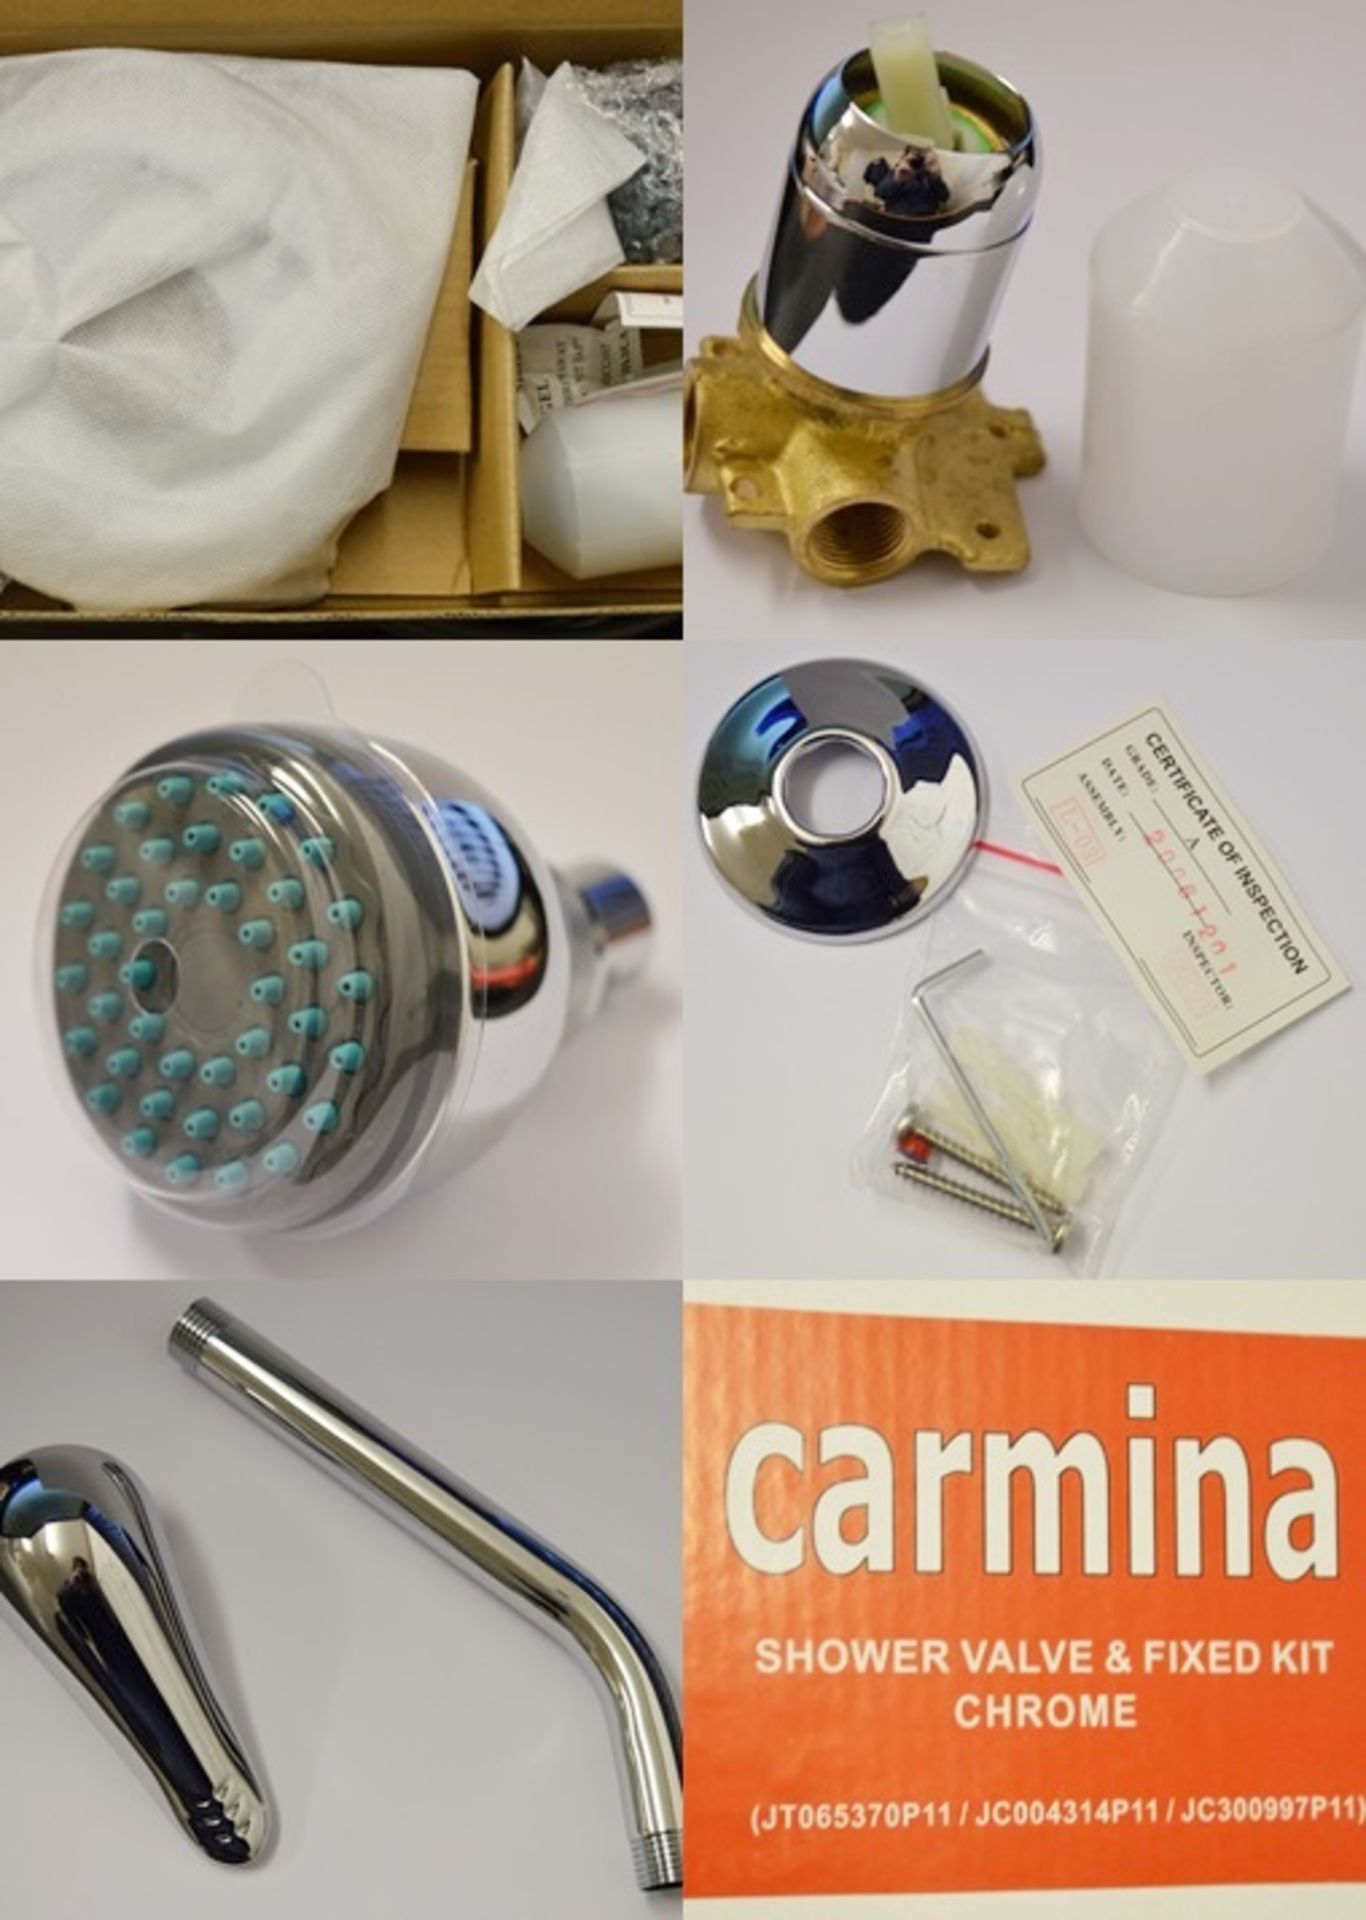 1 x Carmina Shower Valve Kit - Contains Chrome Shower Head, Fixed Arm and Manual Control - Brass - Image 3 of 13